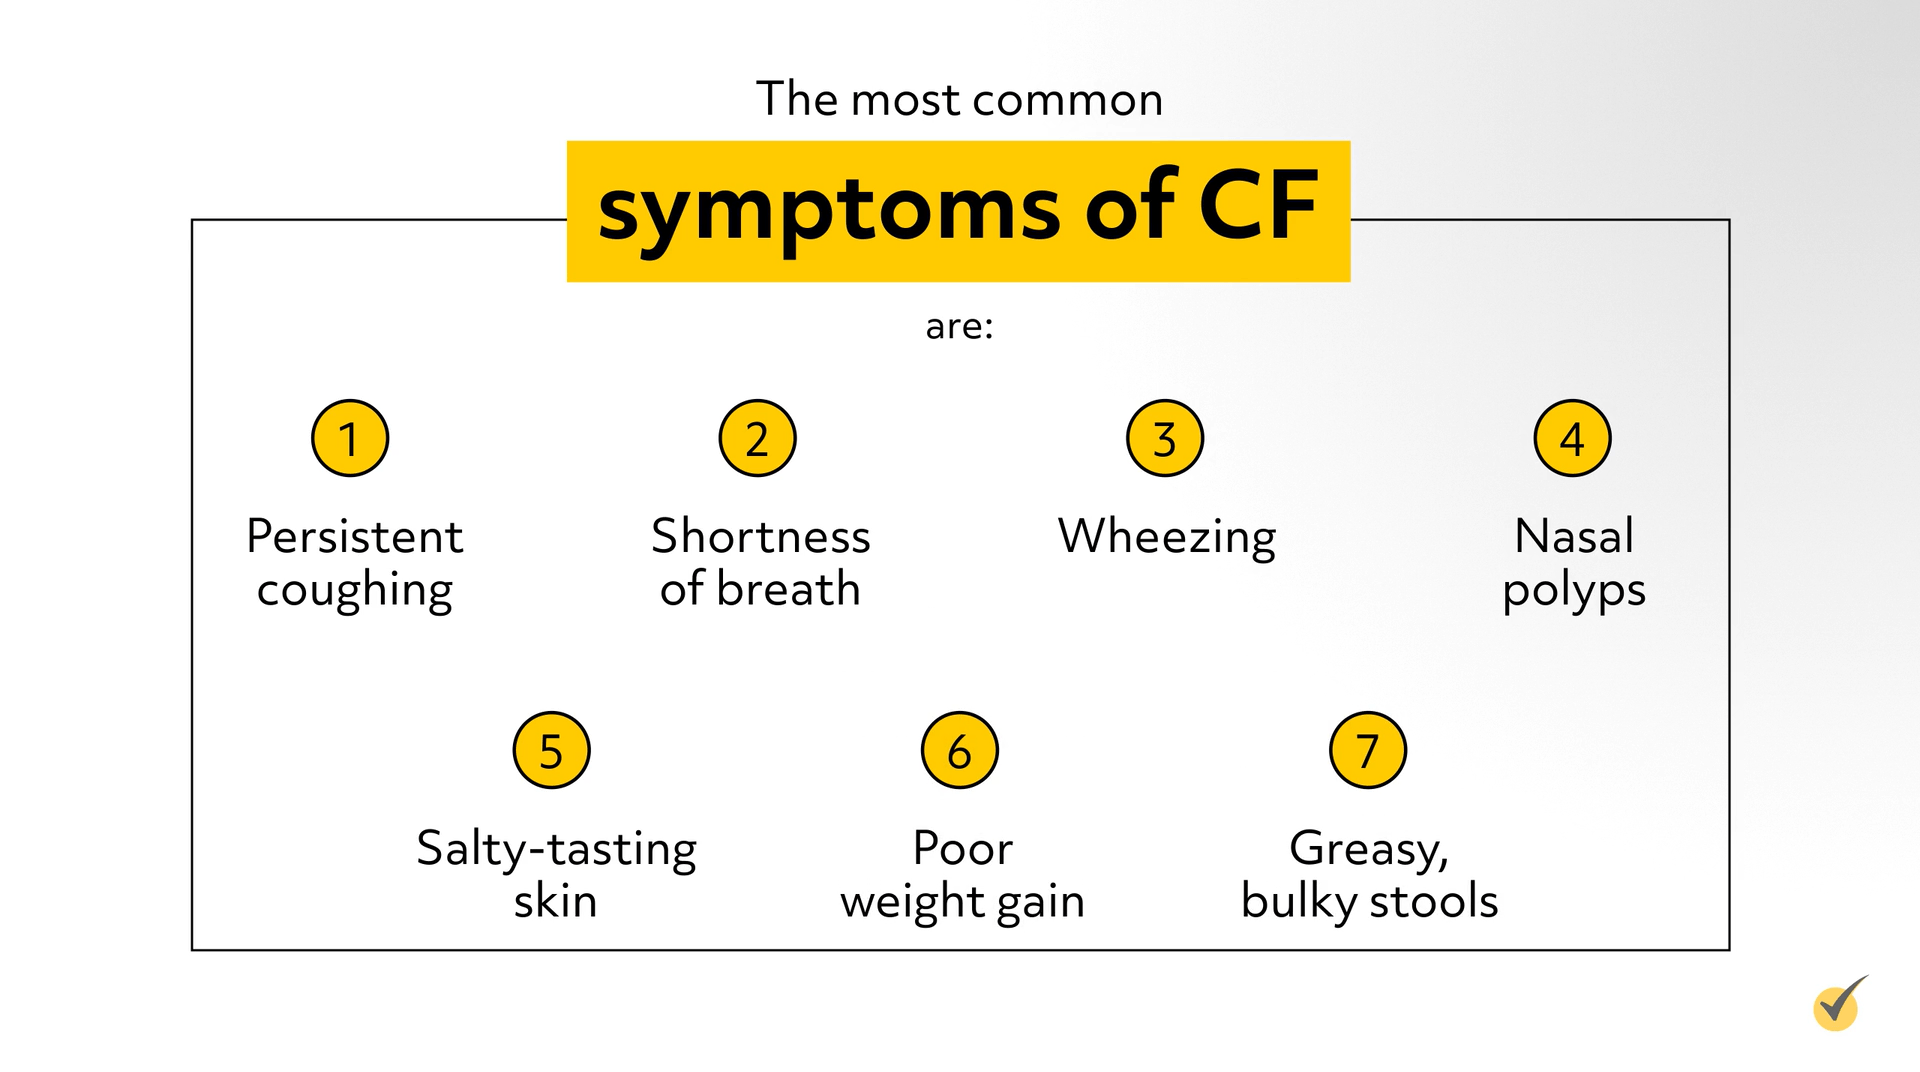 Points of the symptoms of CF